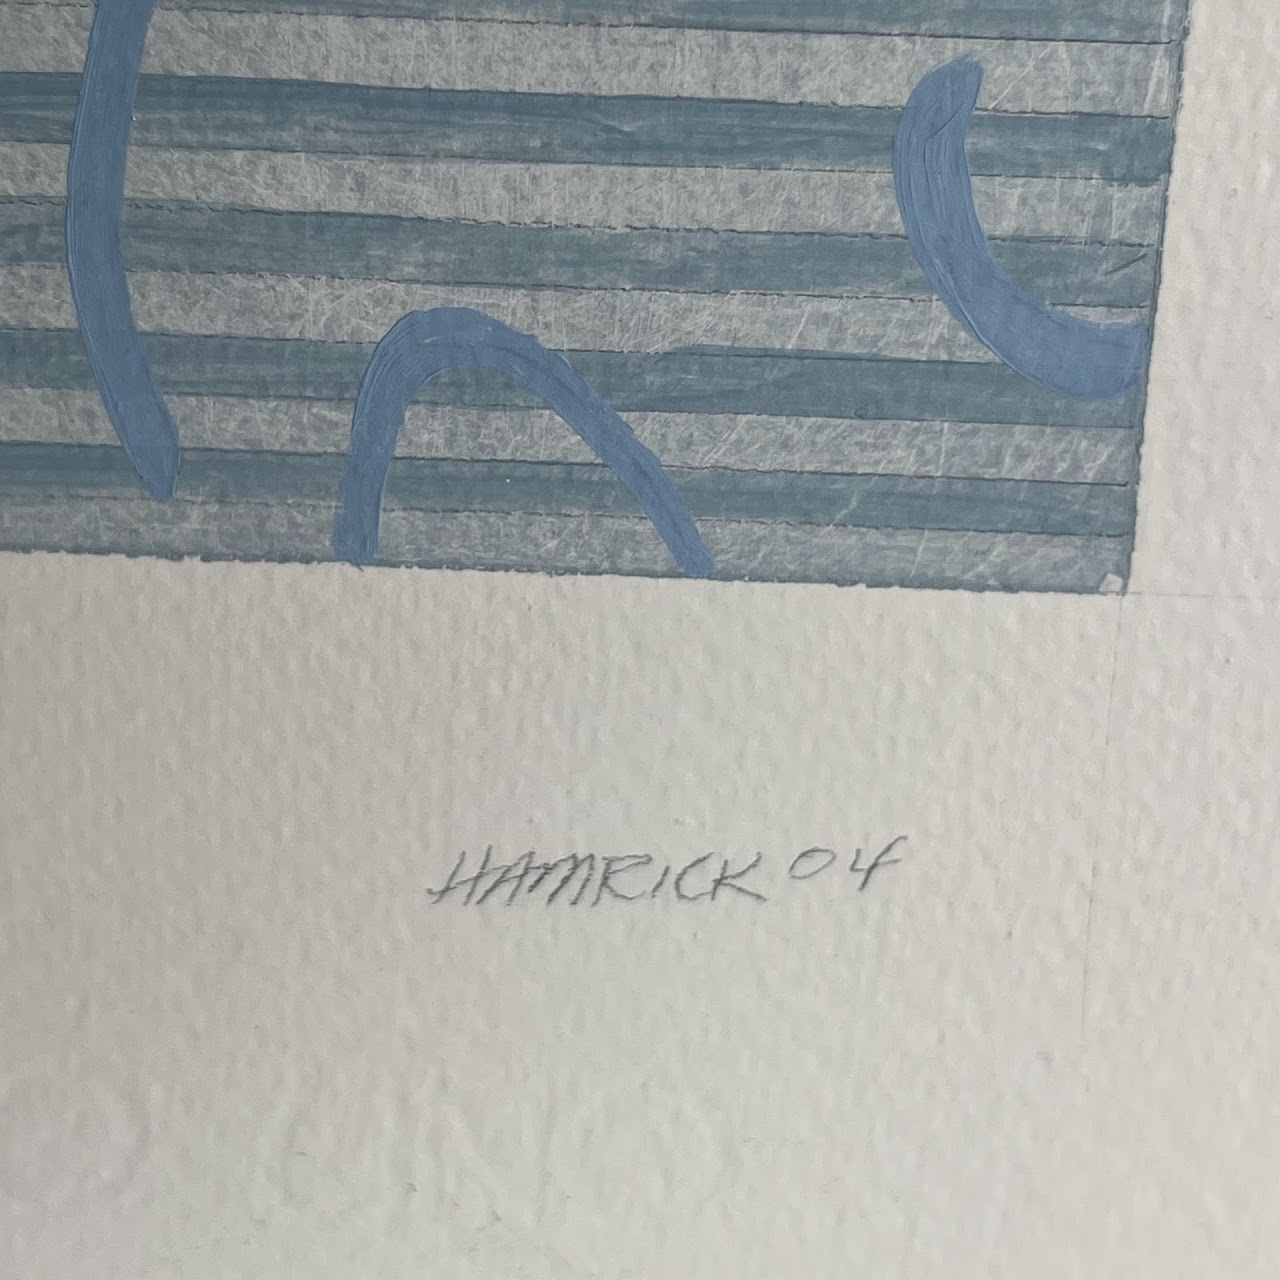 Hamrick 'Water Notes' Signed Gouache and Pencil Abstract Painting